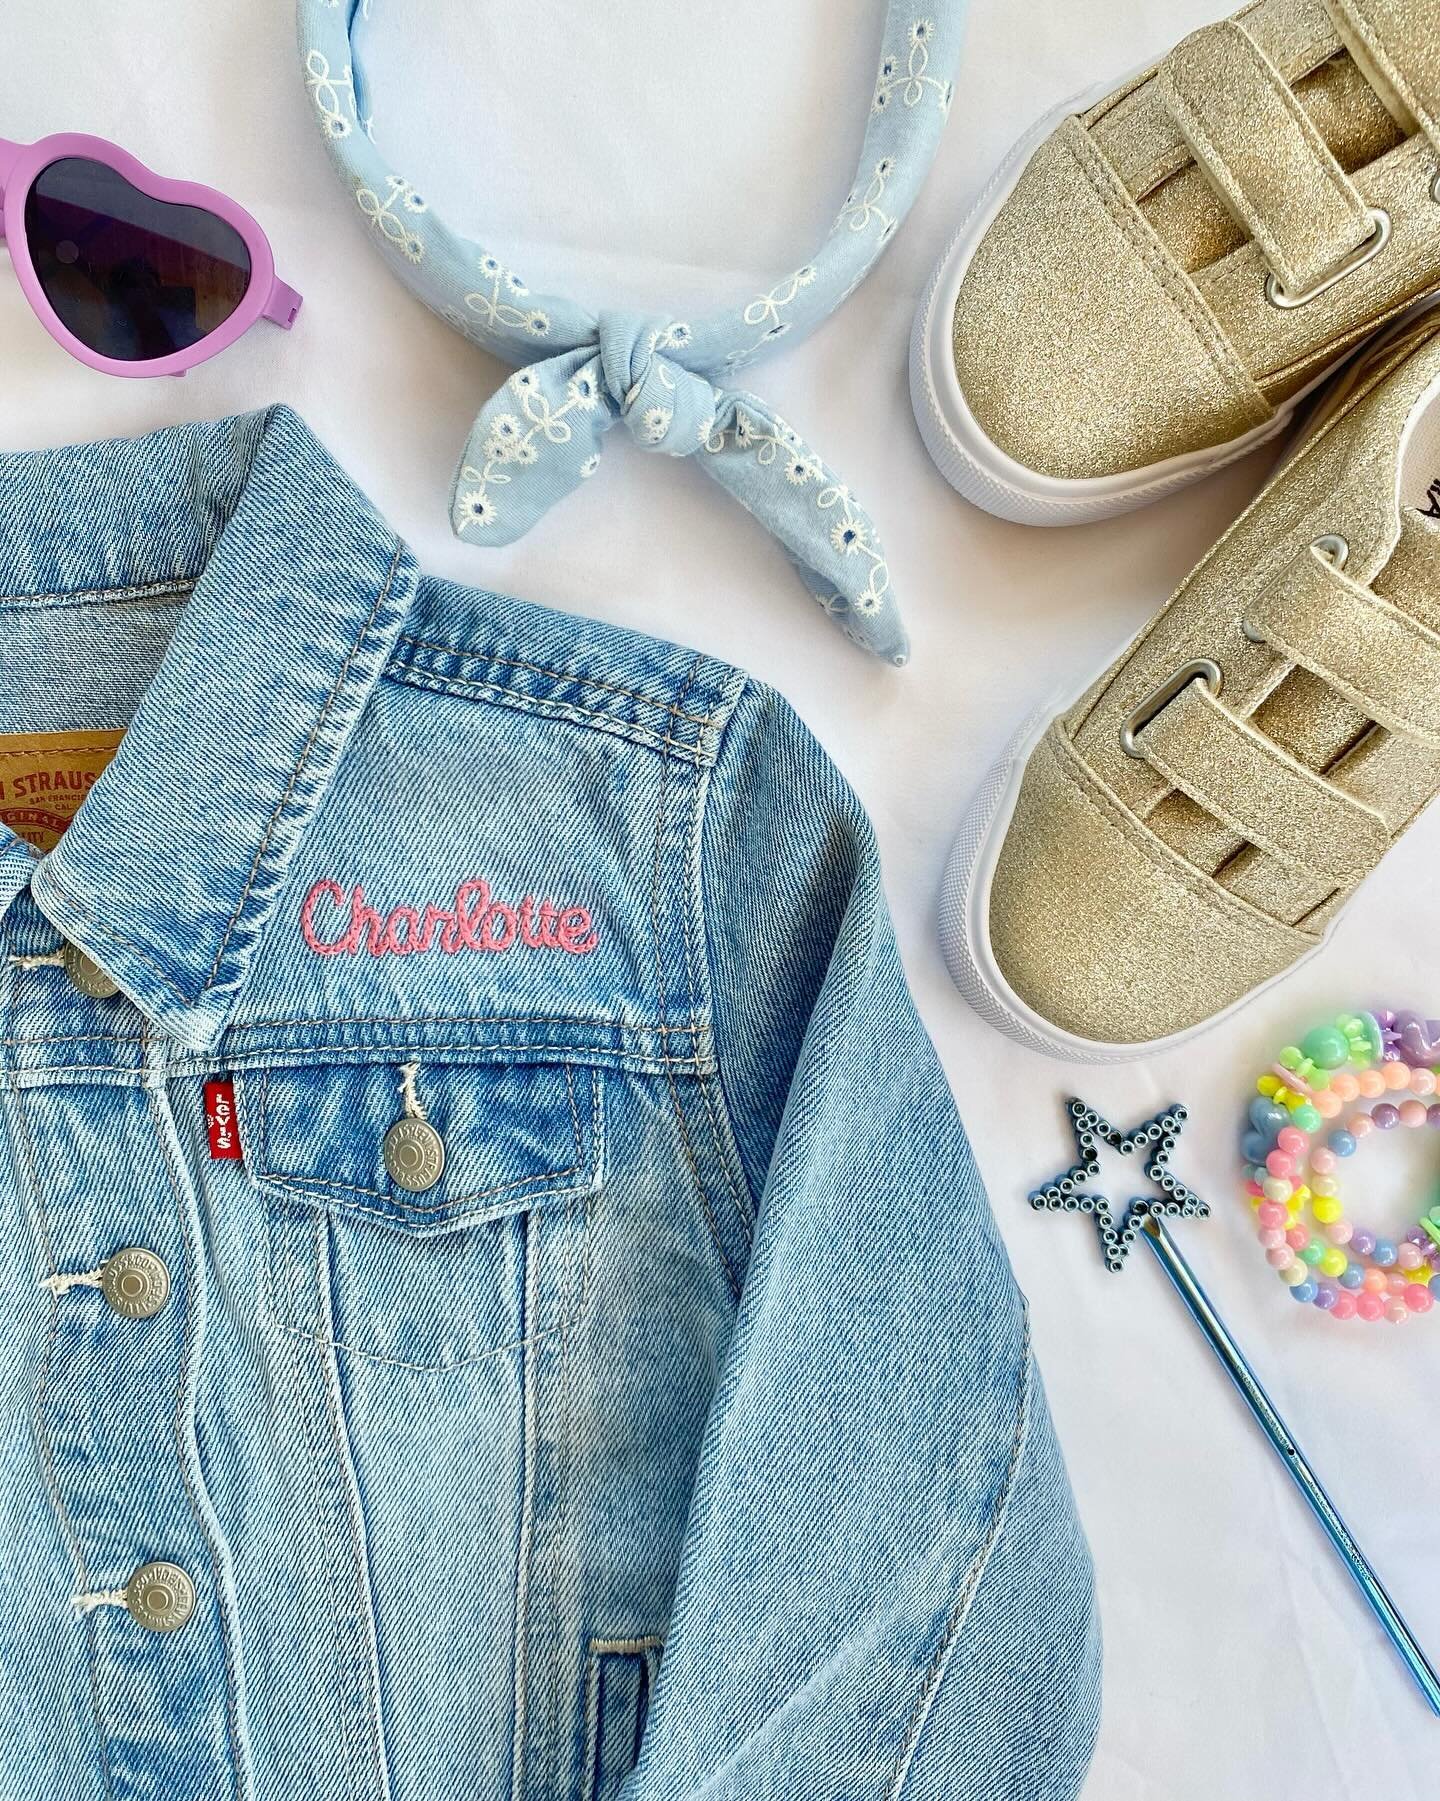 I think today officially marks it jean jacket szn y&rsquo;all! ☀️

Classic Levi&rsquo;s Denim Jacket in light wash for Charlotte 💕